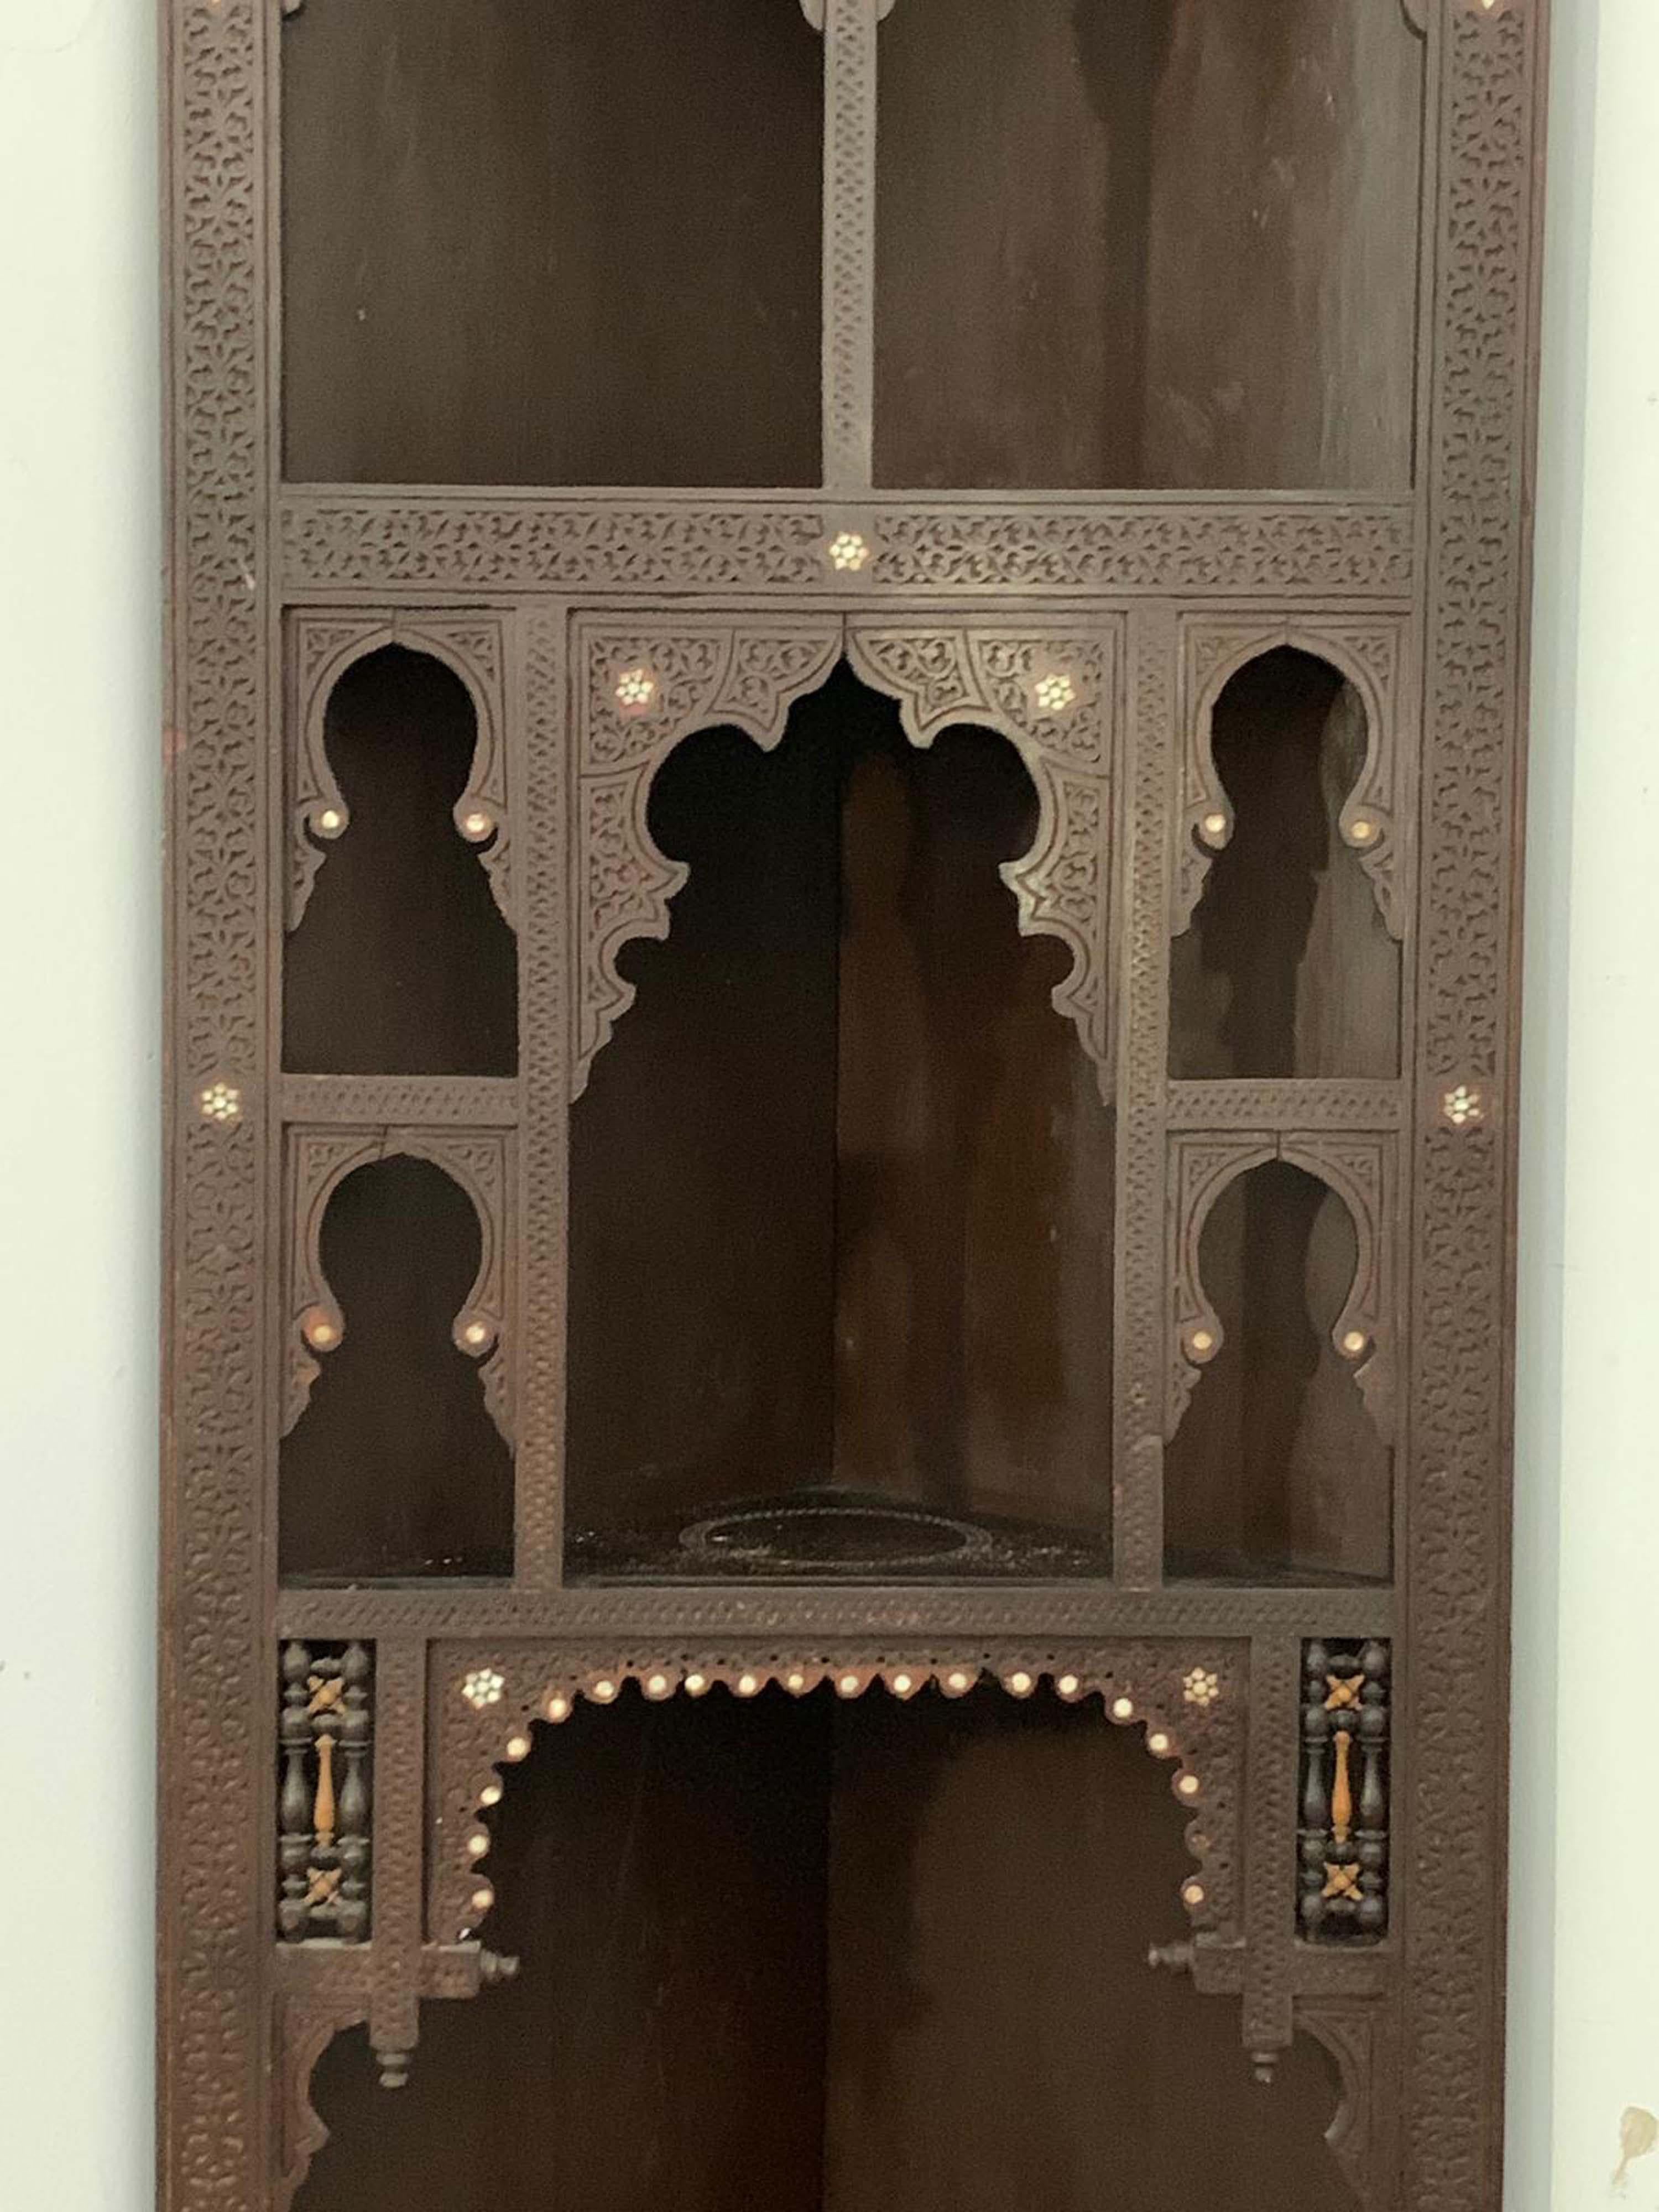 British Indian Ocean Territory.
Indian colonial corner cabinet from the end of the 19th century, carved teak wood.

Packaging with bubble wrap and cardboard boxes is included. If the wooden packaging is needed (fumigated crates or boxes) for US